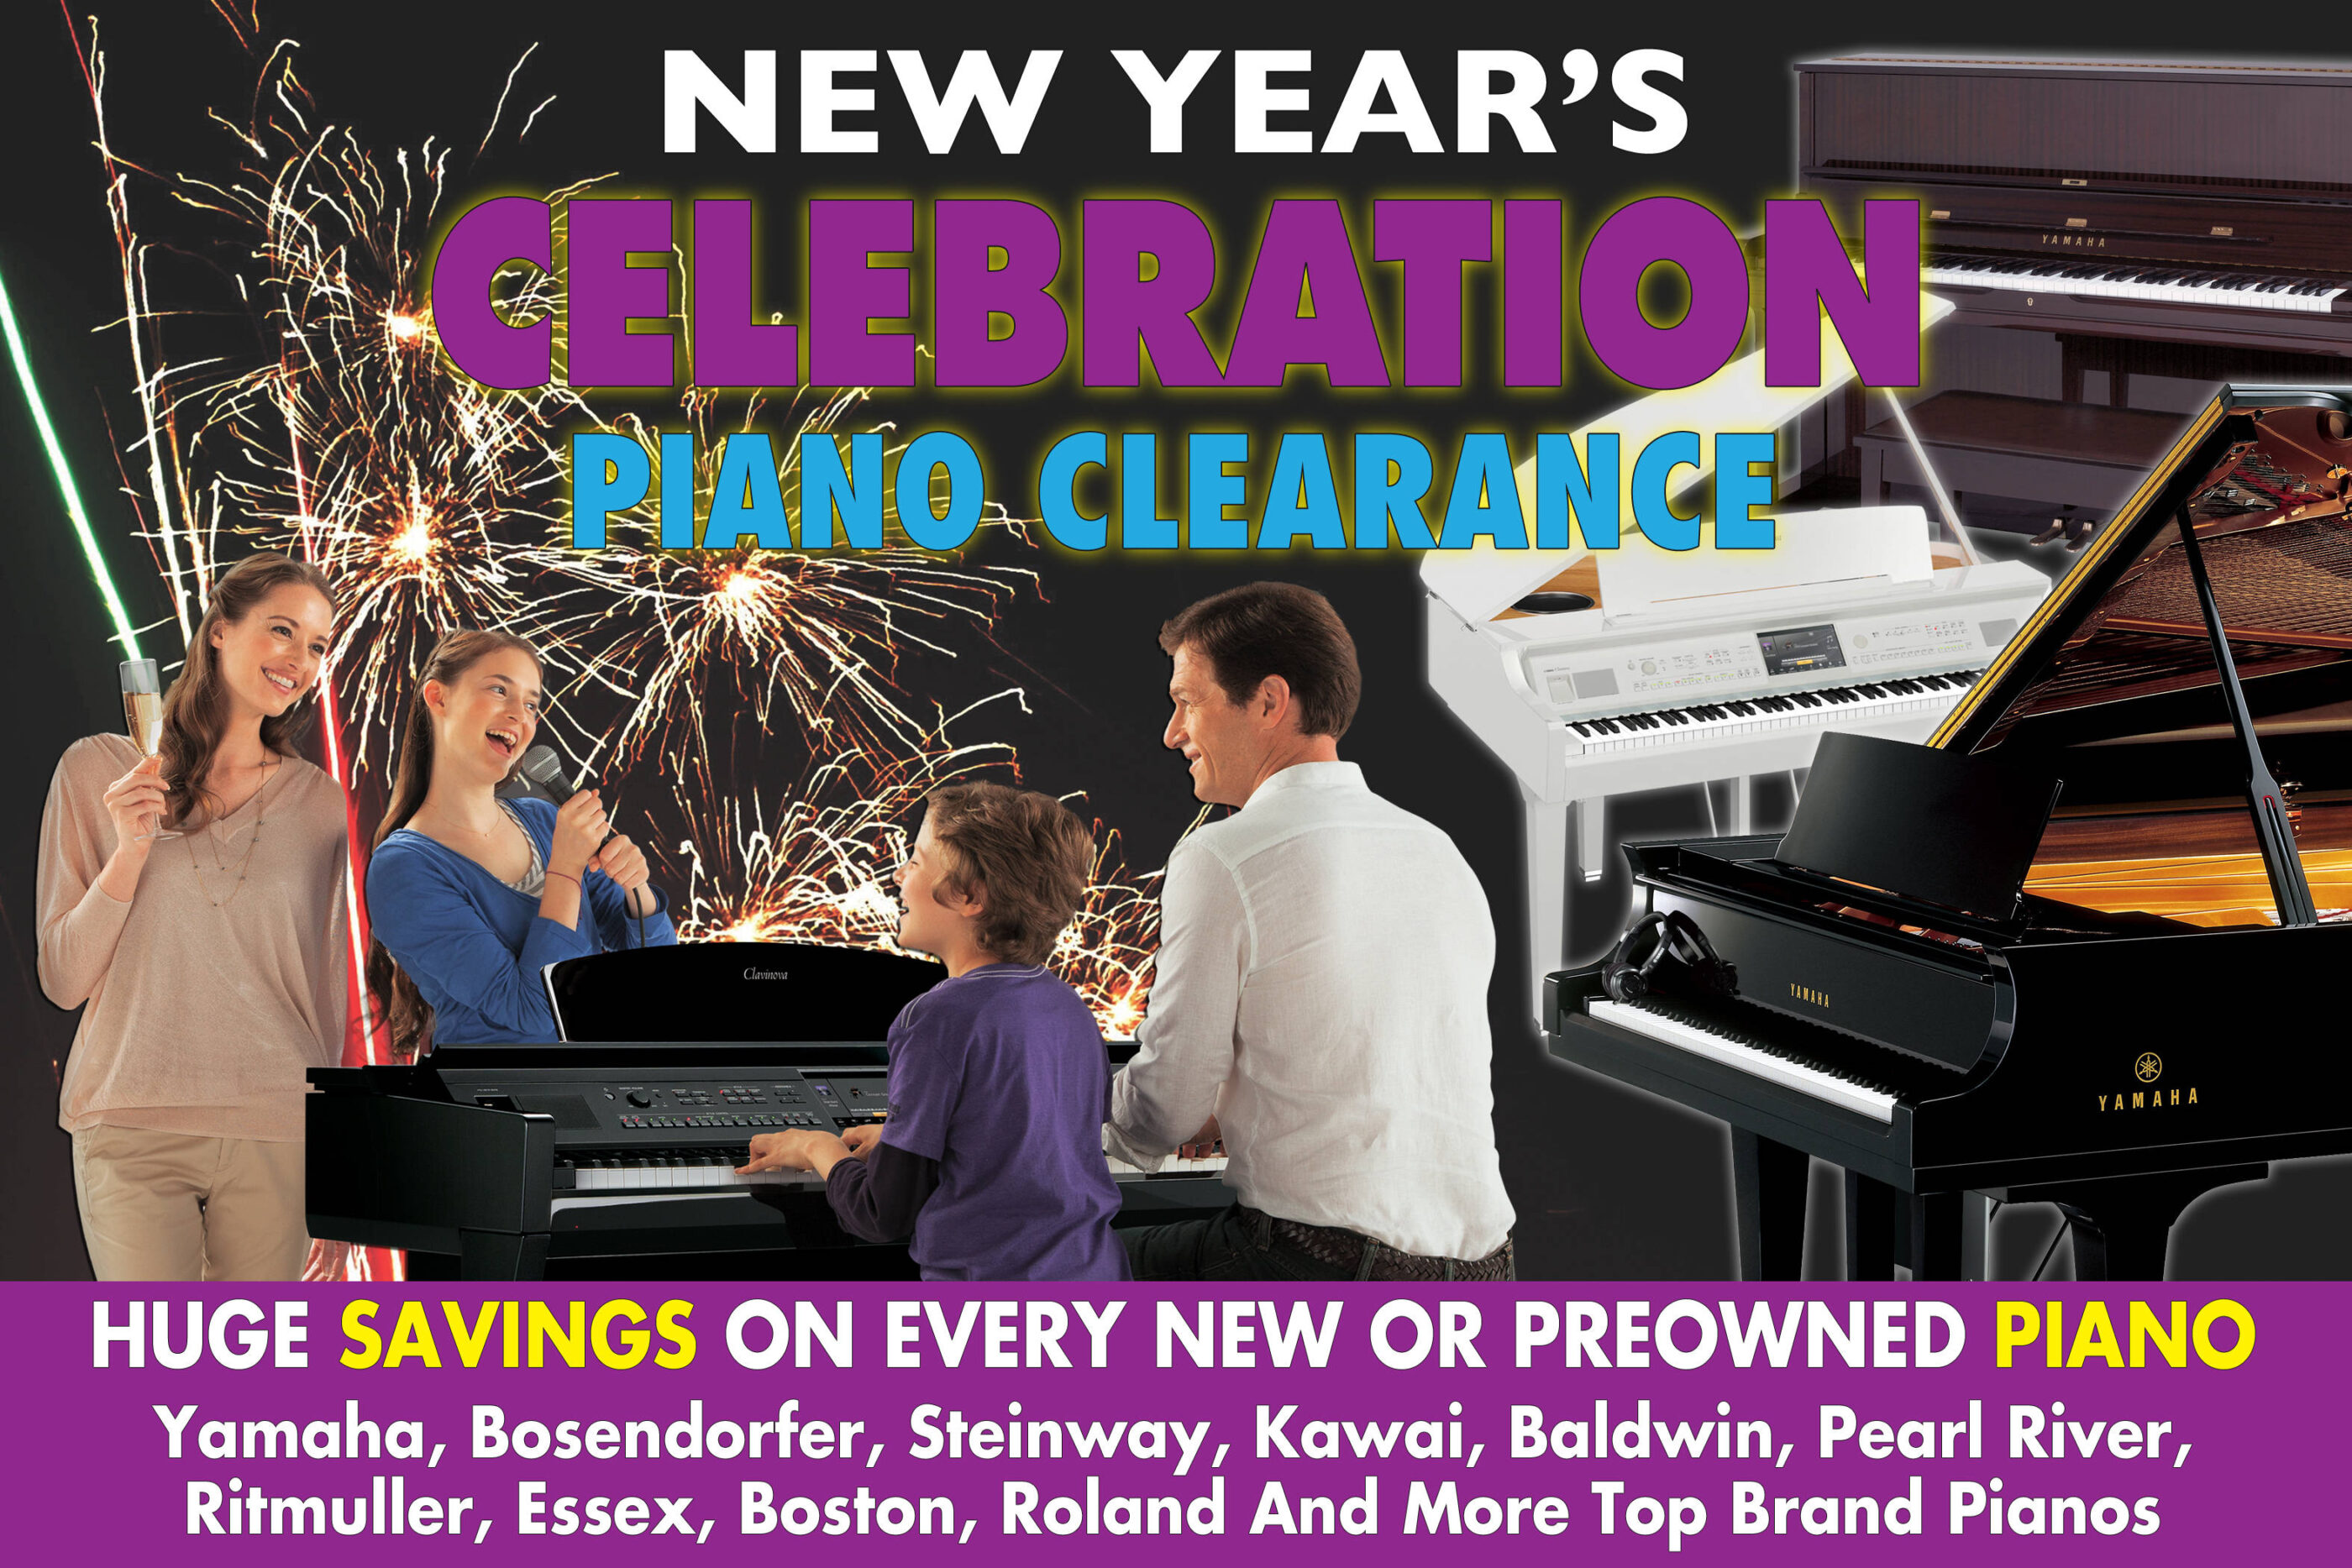 New Year's Piano Clearance.